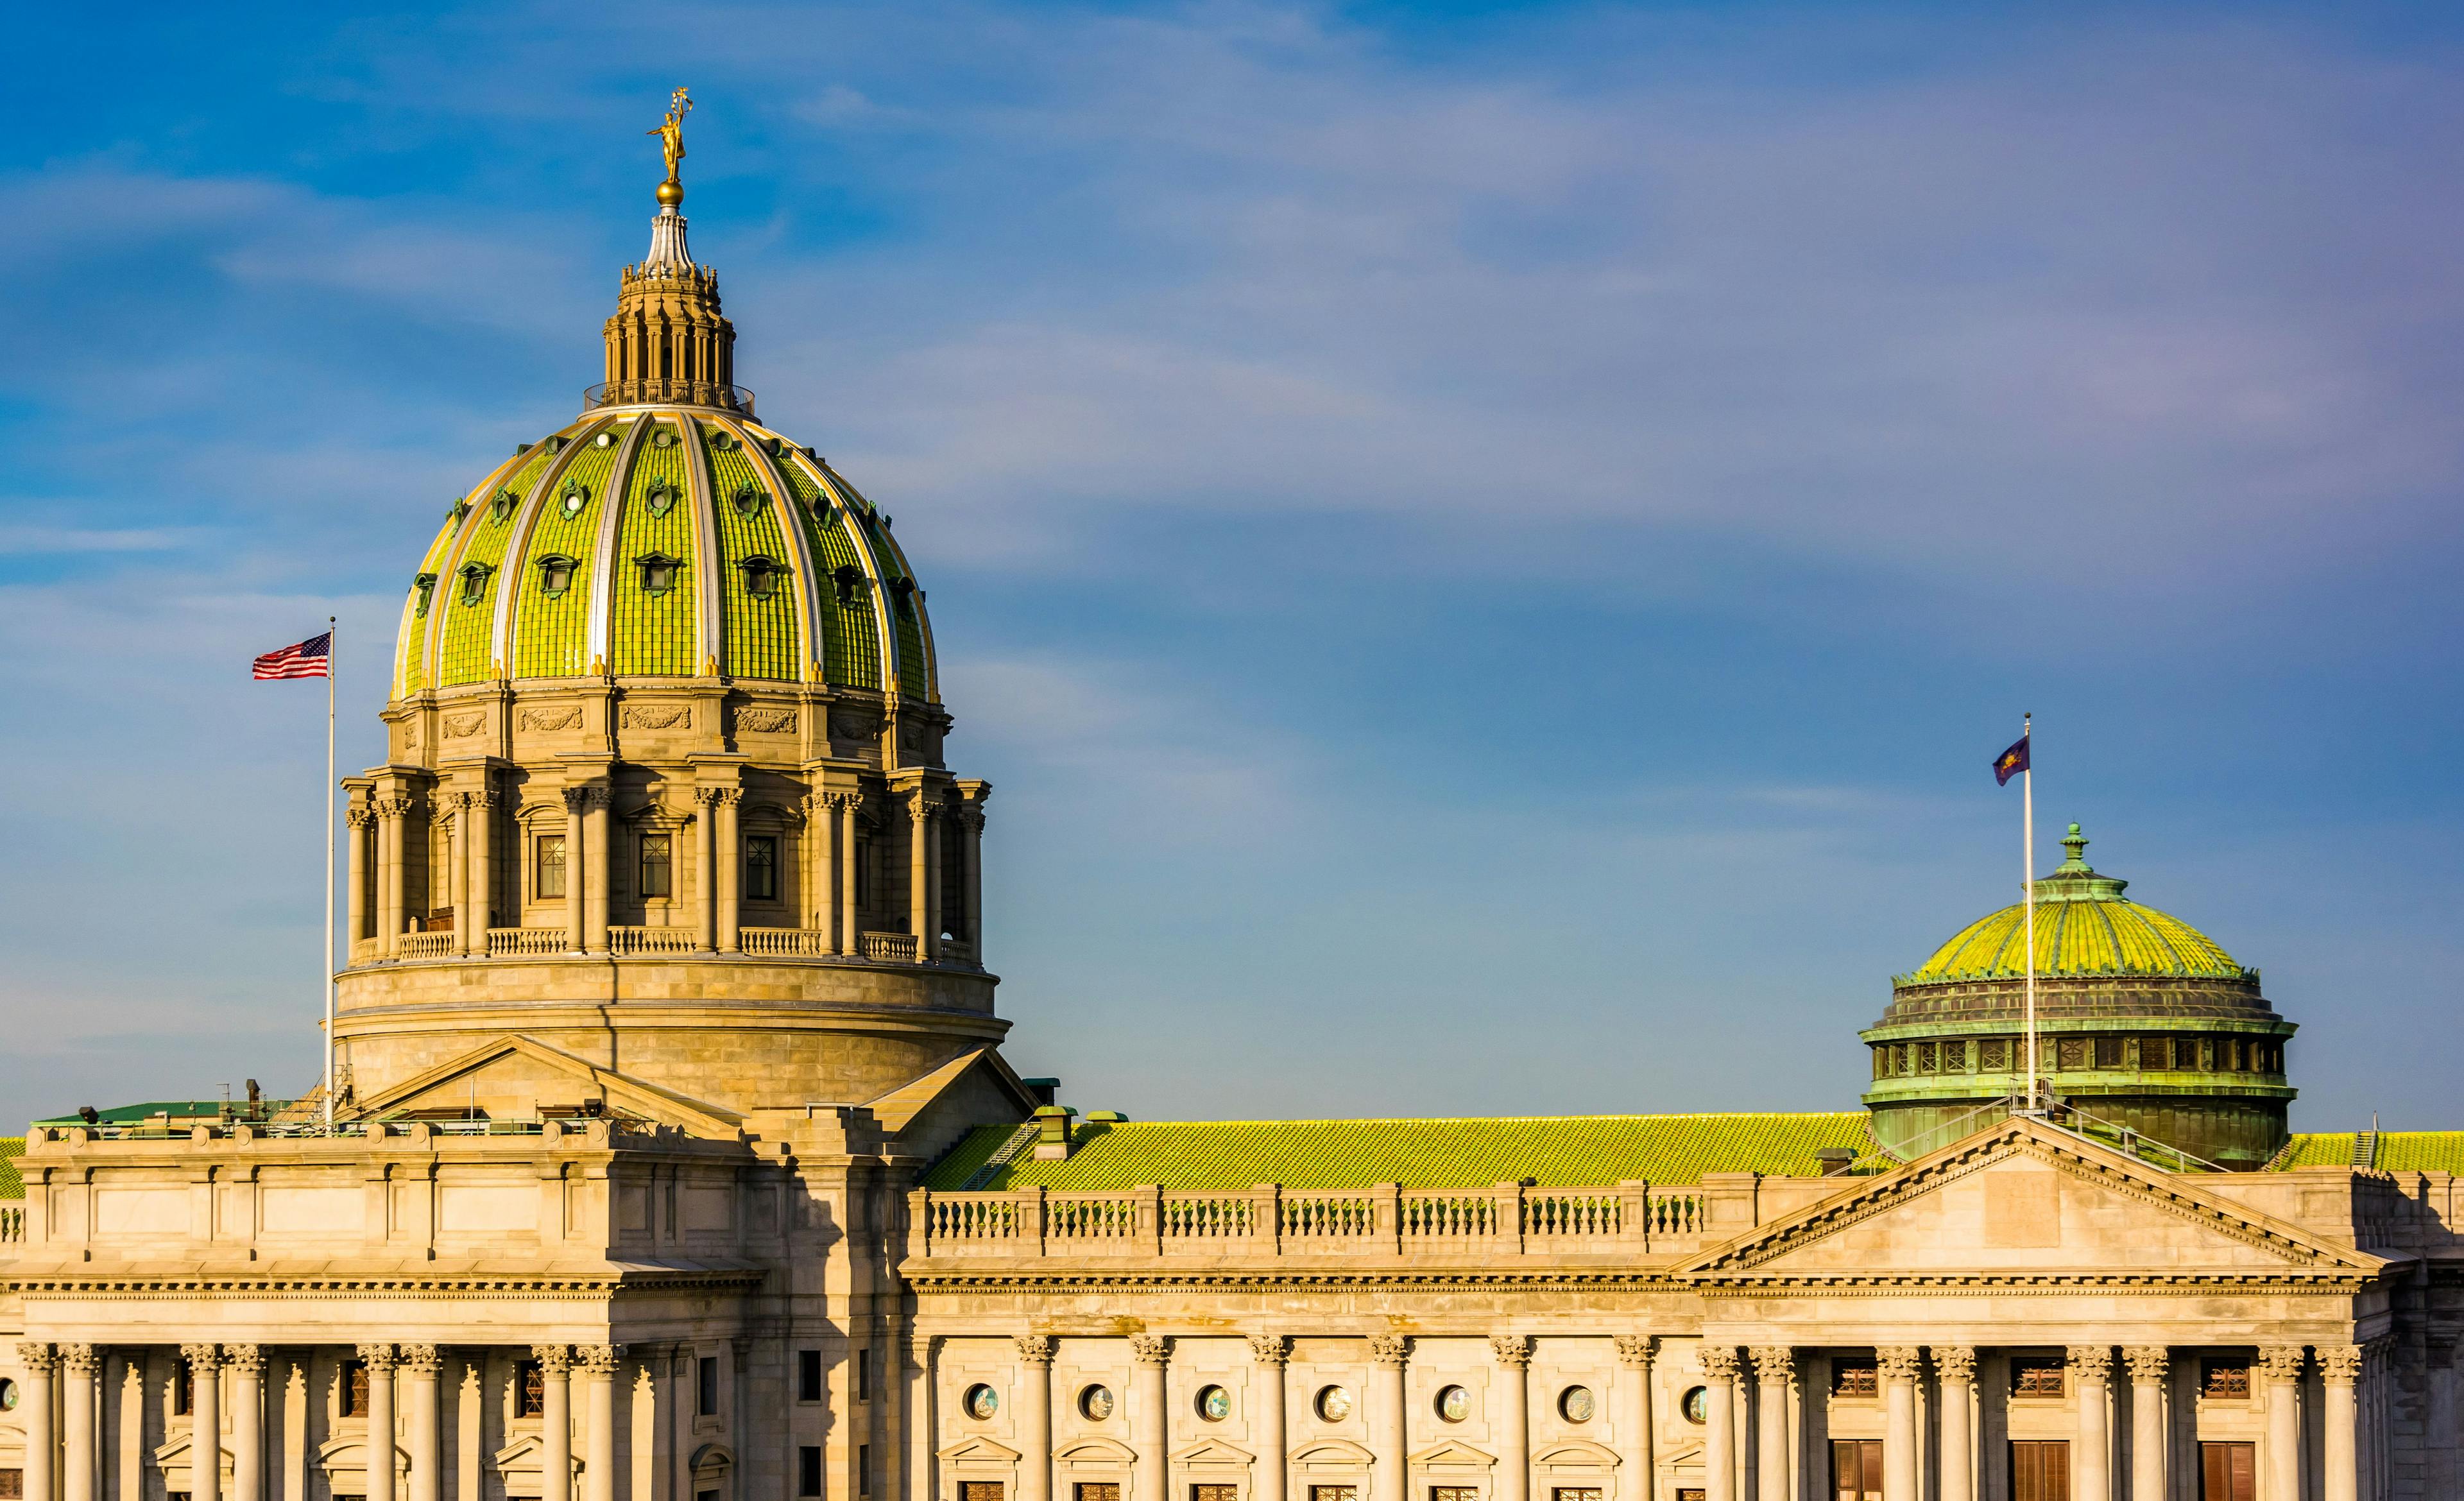 PBM Reform Law Aims to Support Local Pharmacies in Pennsylvania